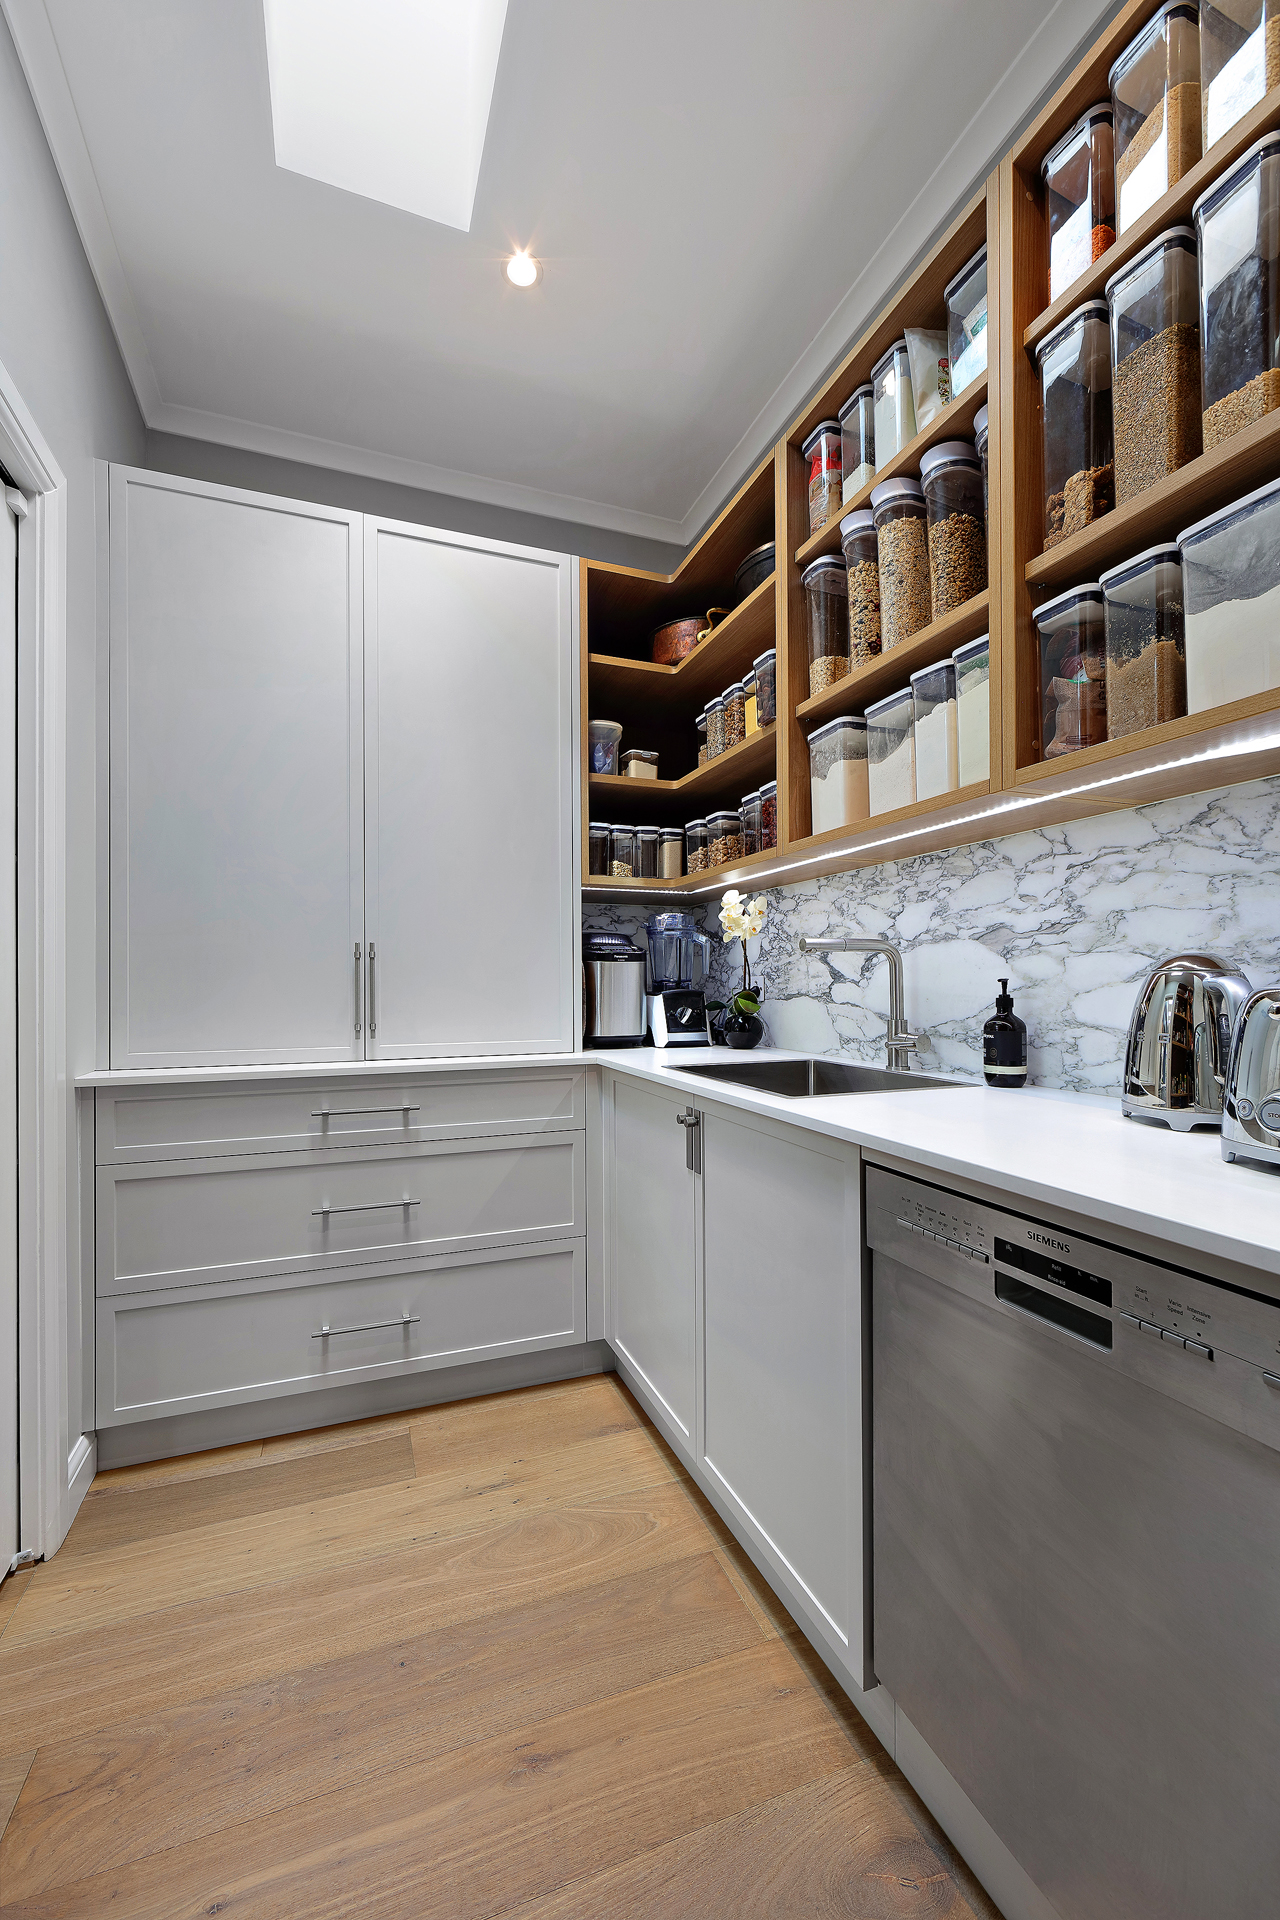 Scullery design -White cabinets, wooden shelves for spices and Siemens Dishwashing machine